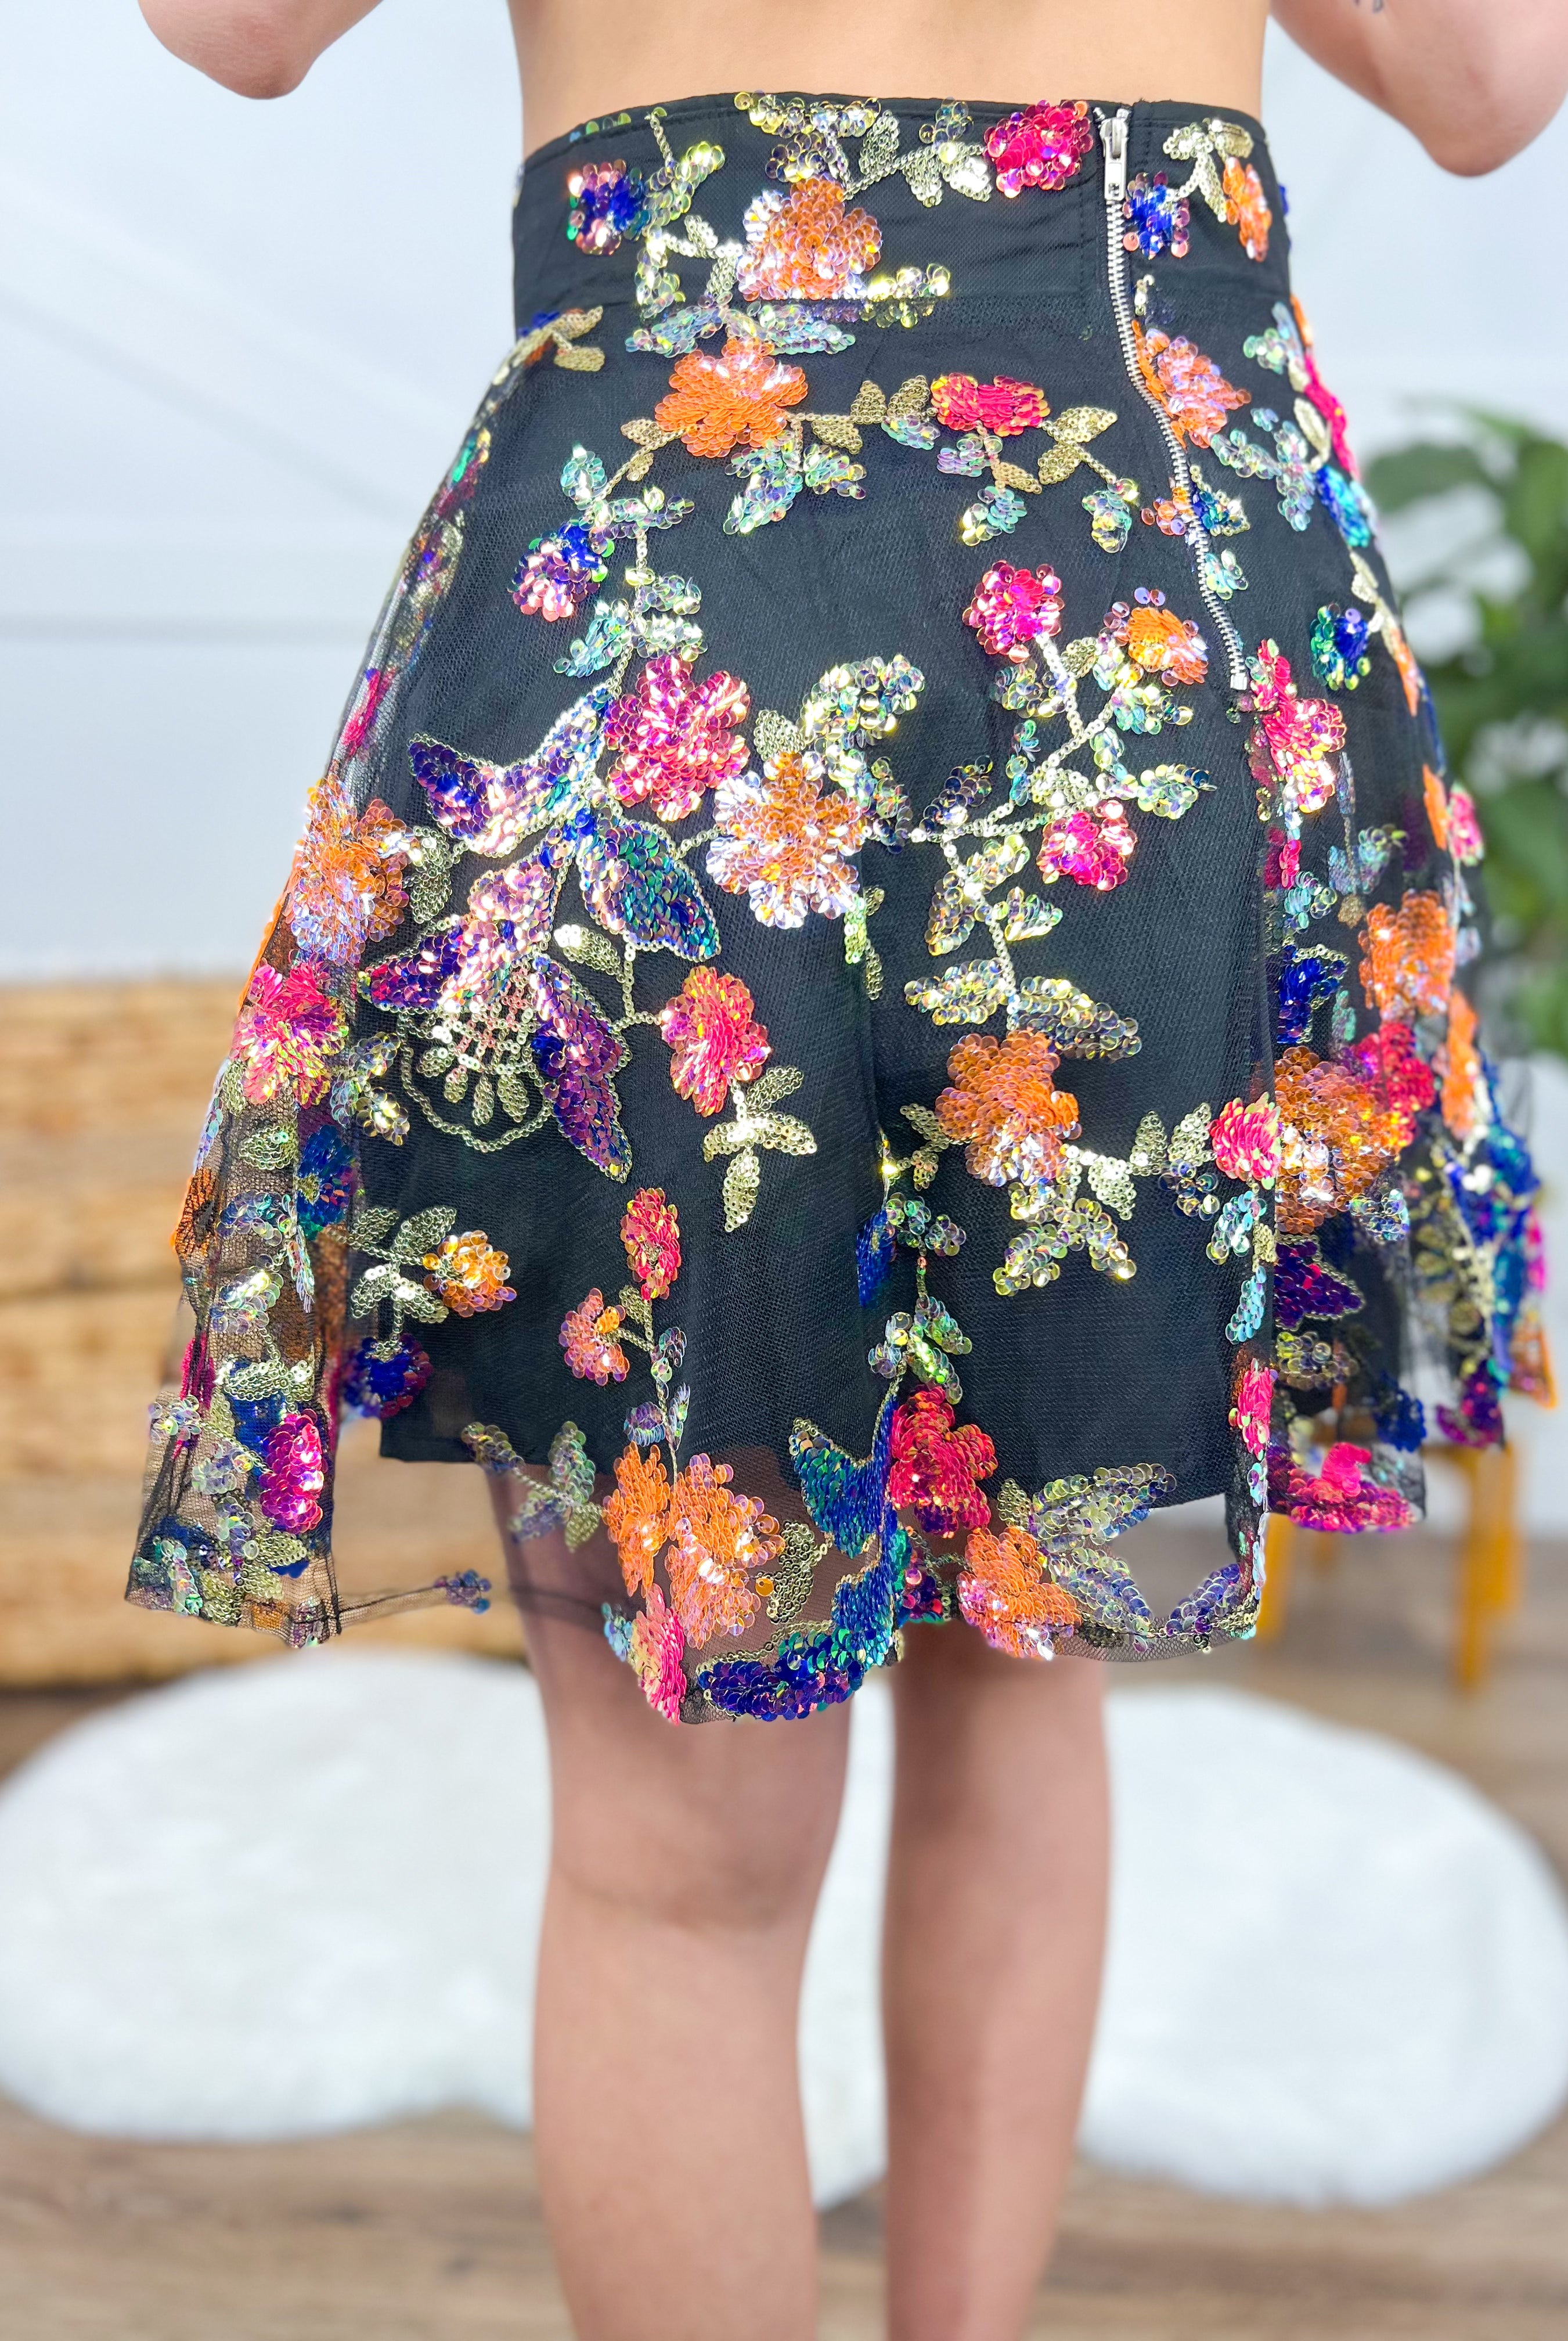 Life of the Party Skirt-170 Skort/ Skirt-GeeGee-Heathered Boho Boutique, Women's Fashion and Accessories in Palmetto, FL